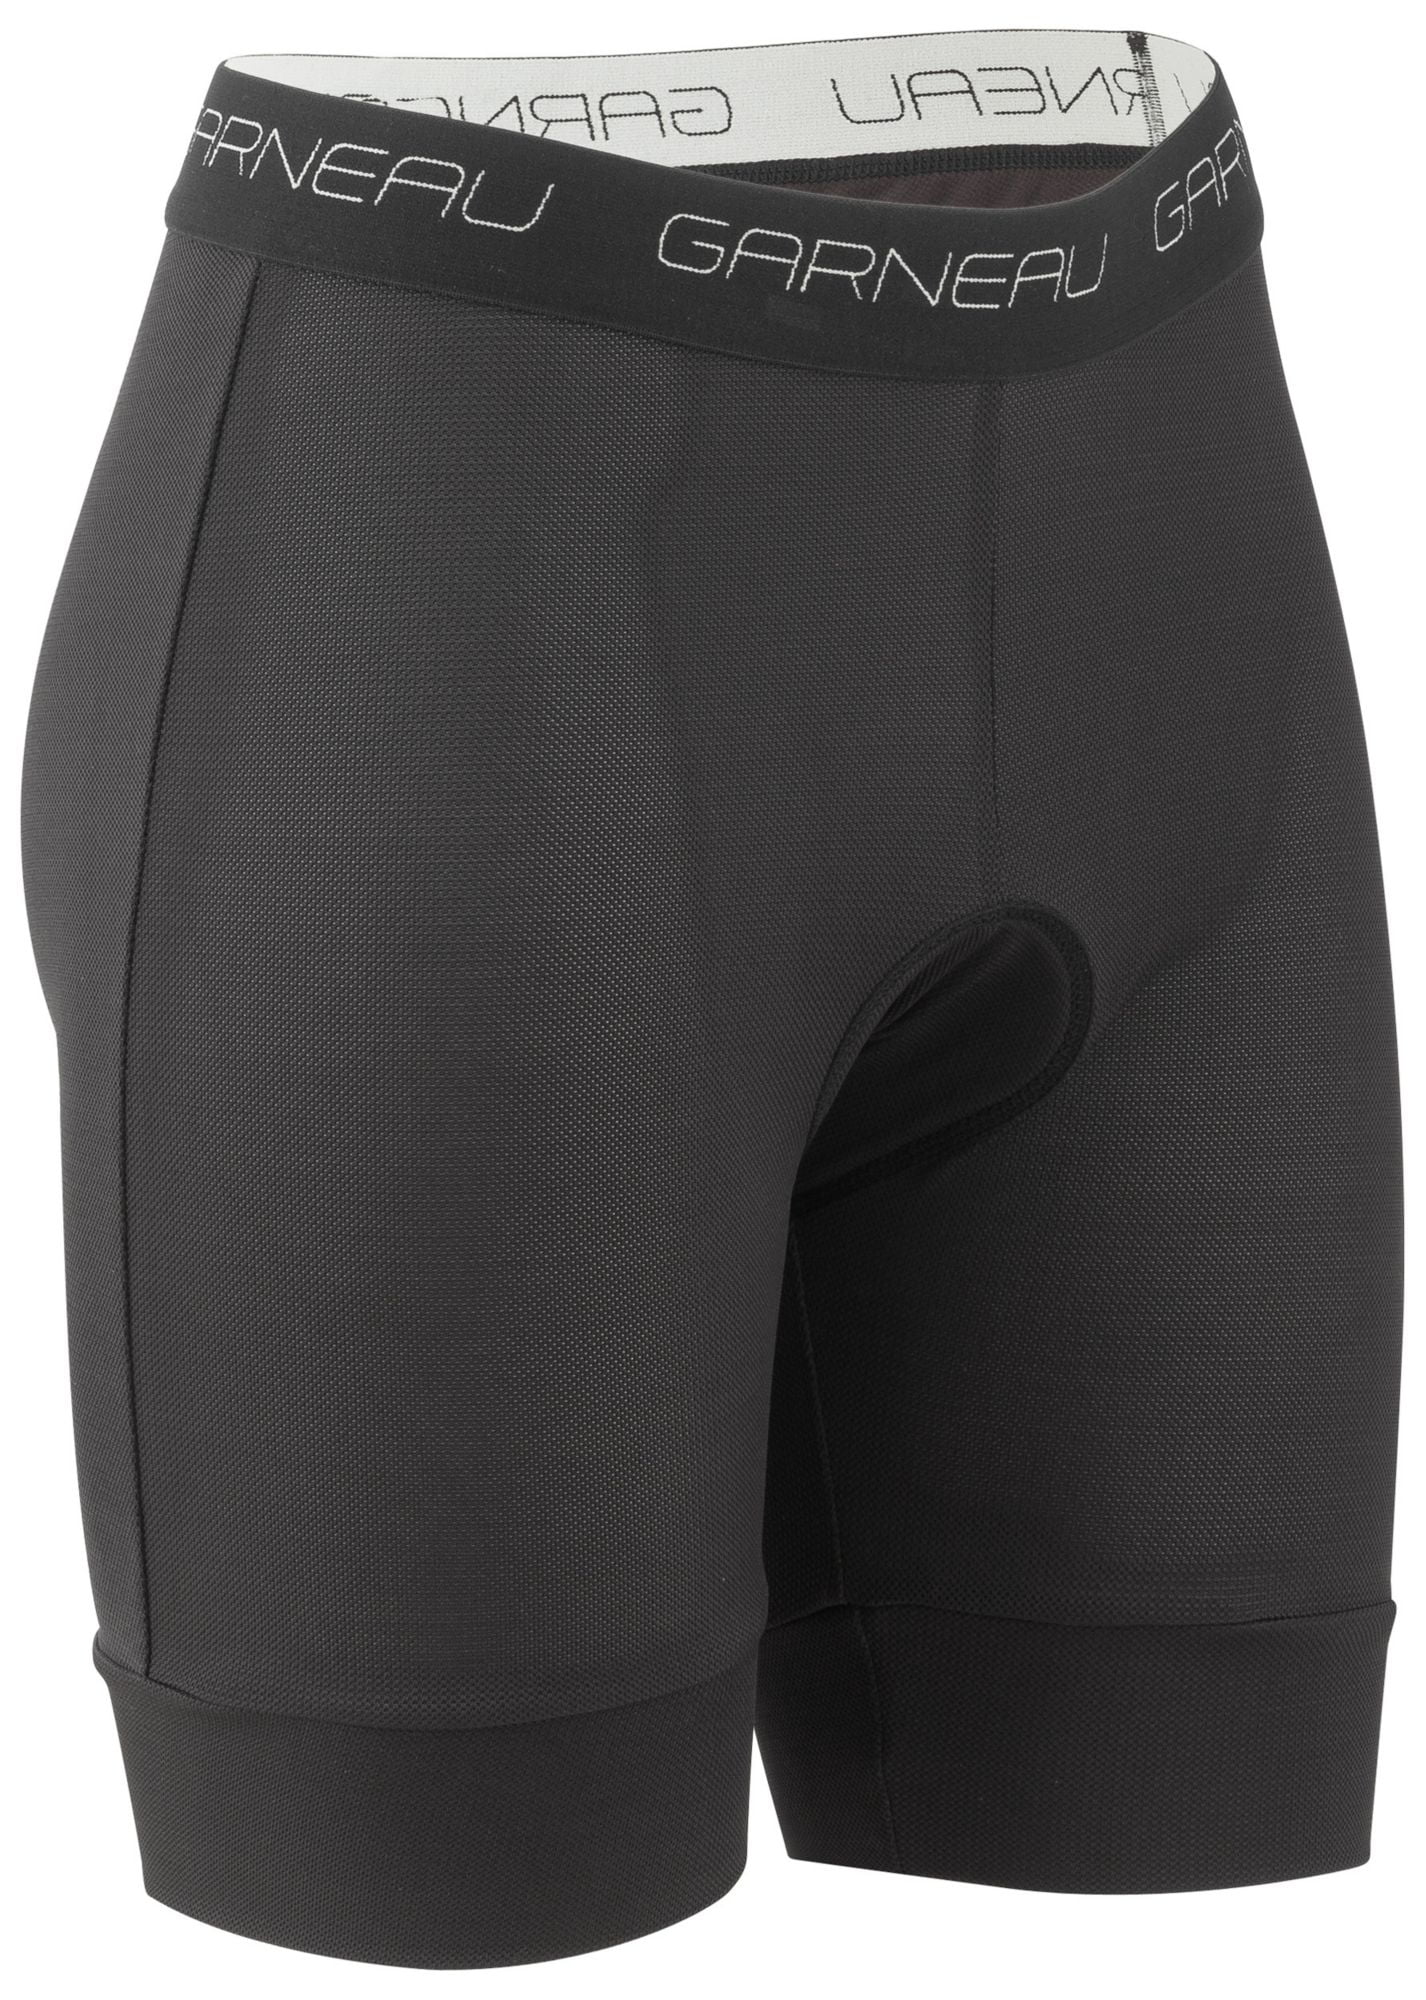 women's padded cycling liners